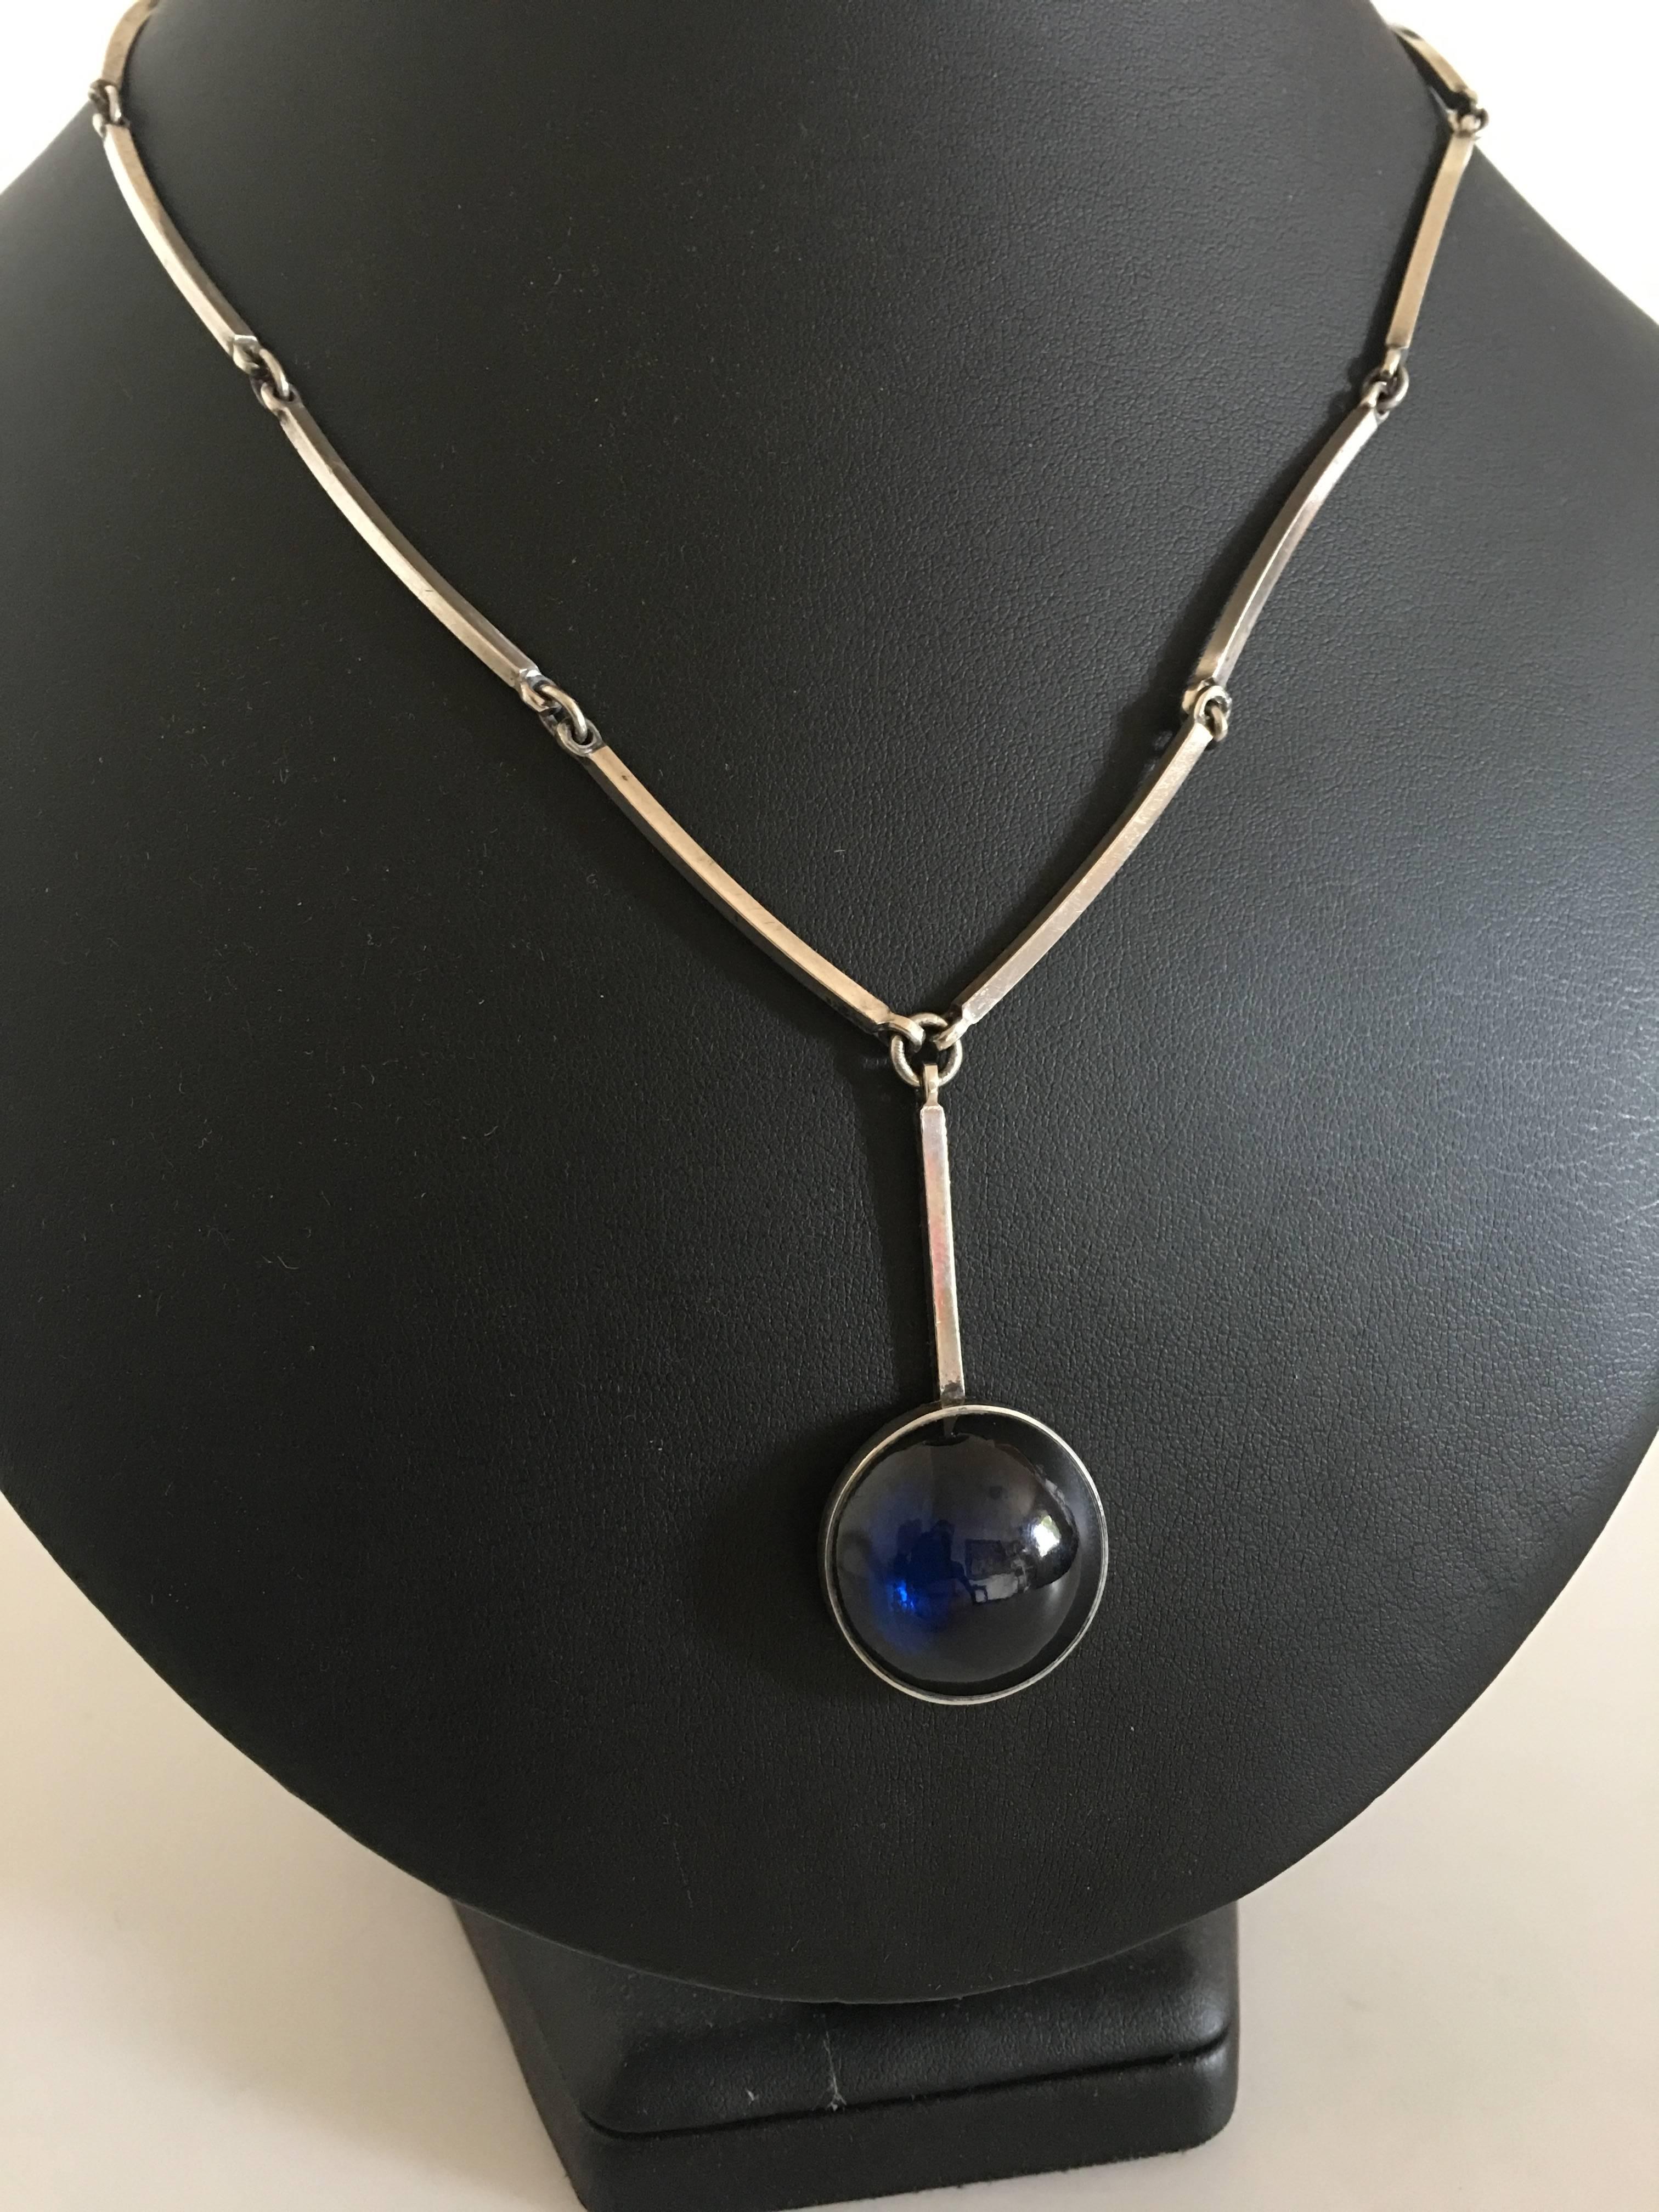 Niels Erik From Sterling Silver Necklace with Blue Stone. Chain measures 44 cm L (17 21/64